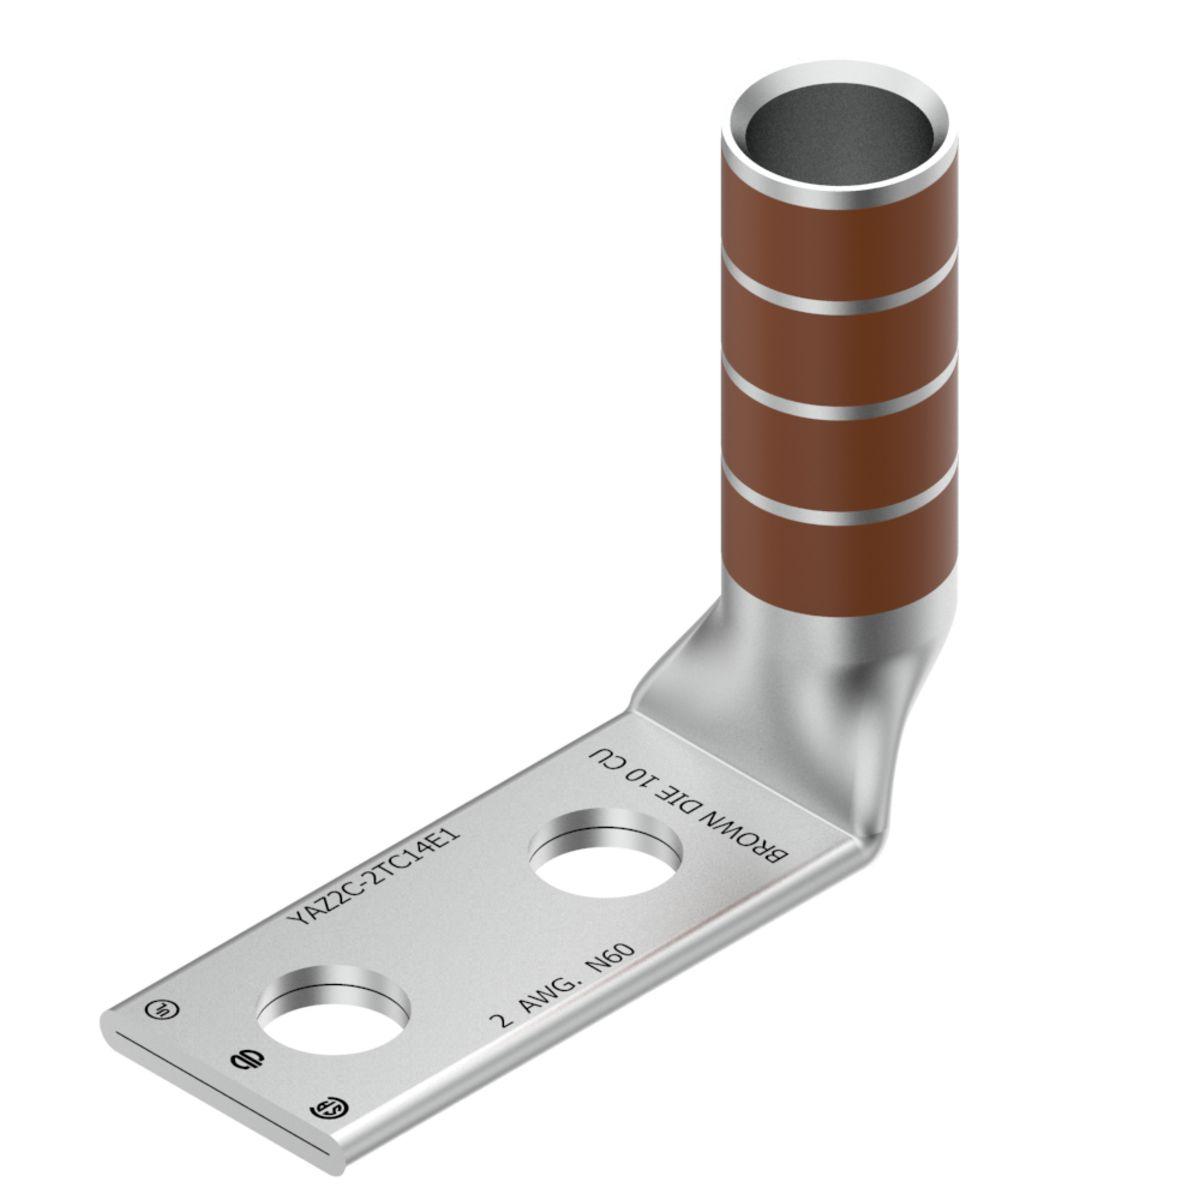 Hubbell YAZ2C2TC14E290 2 AWG CU, Two Hole, 1/4 Stud Size, 3/4 Hole Spacing, Long Barrel, Inspection Window Internal Chamfer, Tin Plated, UL/CSA, 90°C, Up to 35kV, Brown Color Code, 10 Die Index. 